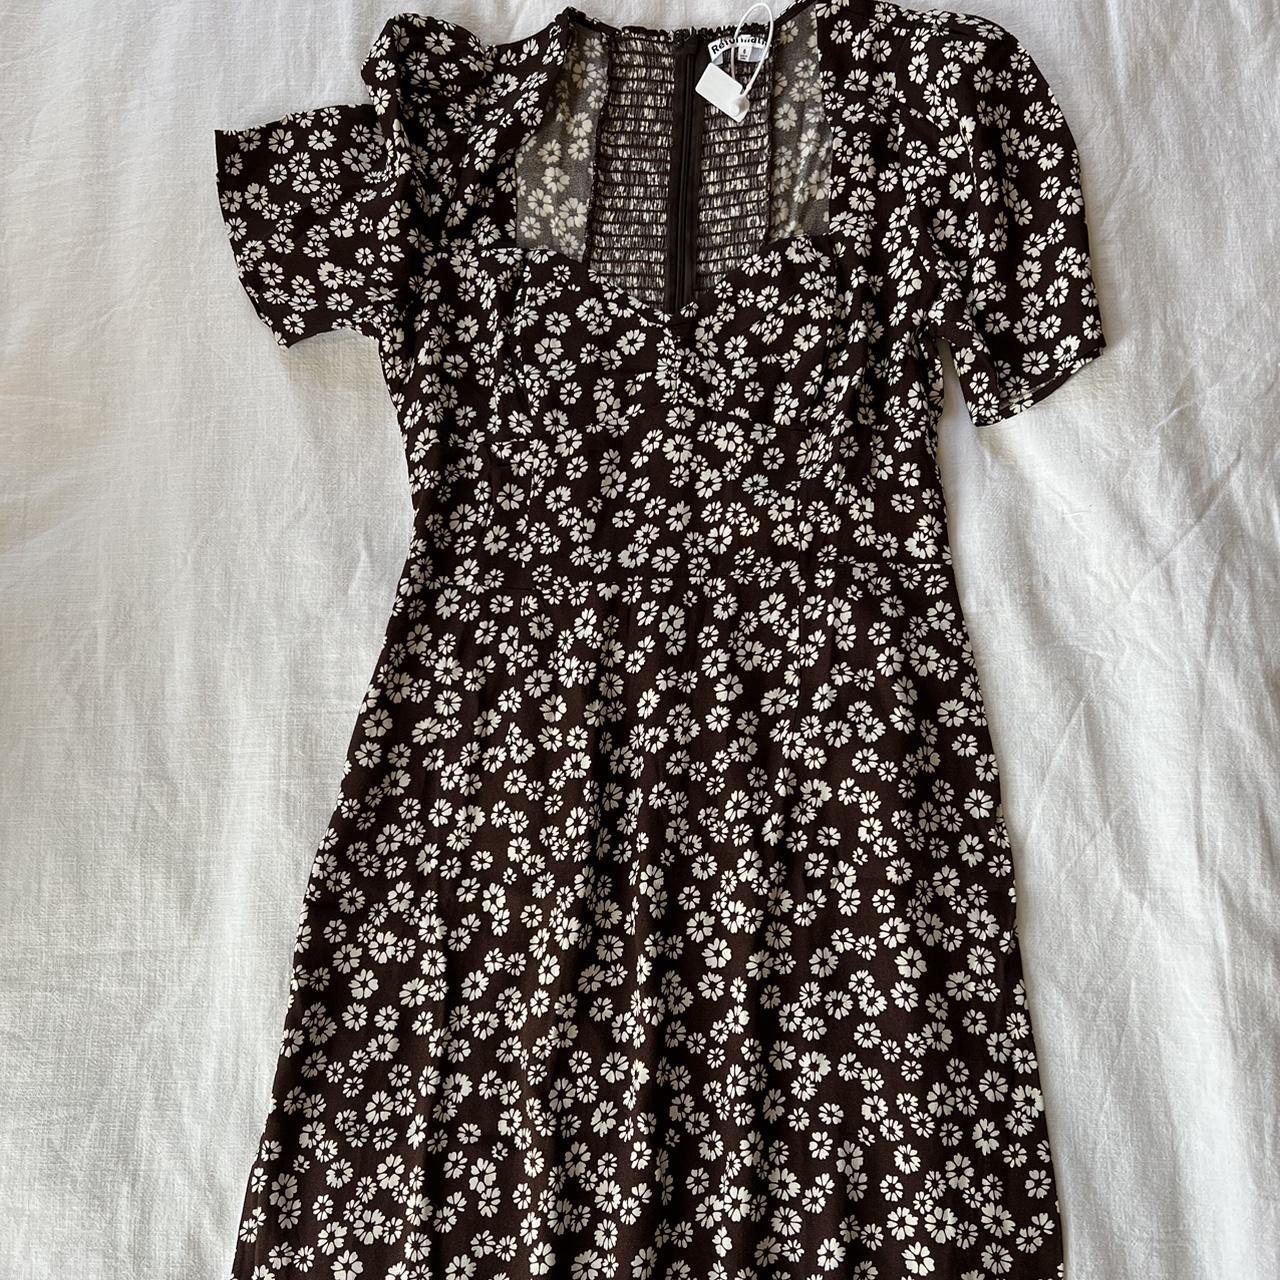 Reformation Women's Brown and White Dress | Depop